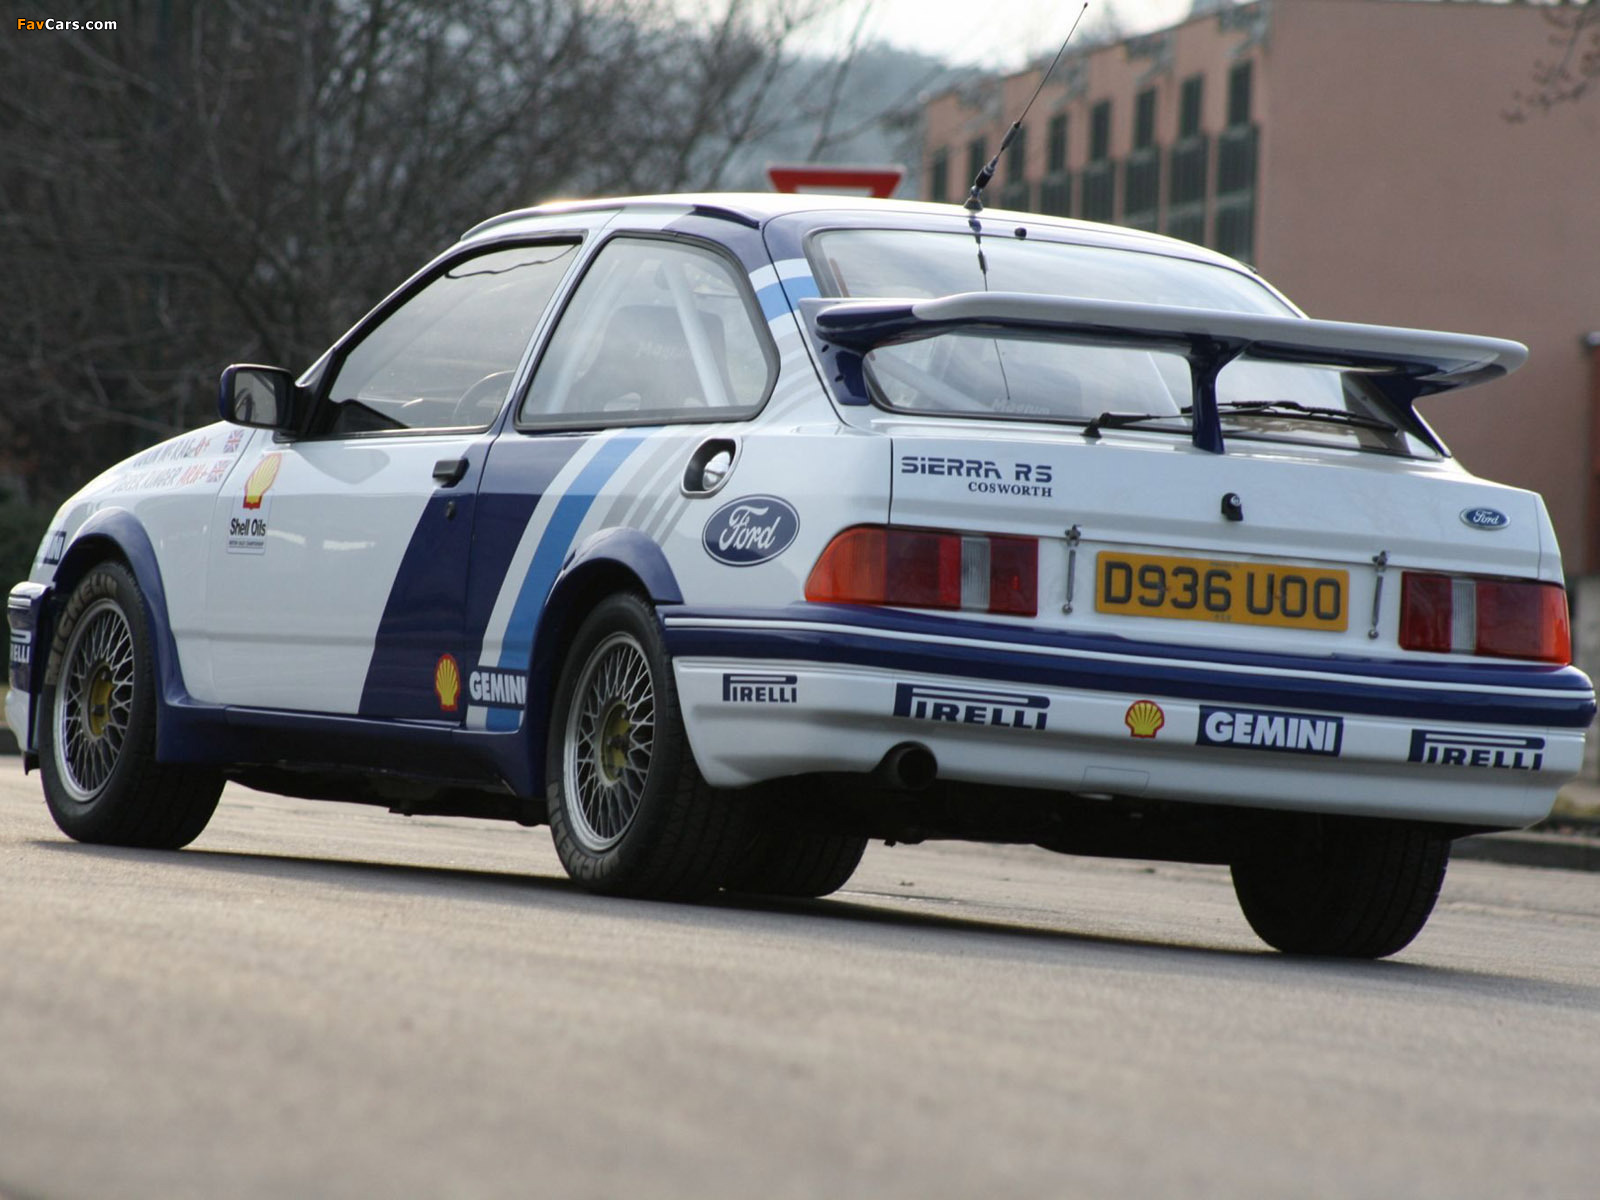 Ford Sierra RS Cosworth Group A Rally Car 1987–89 image (1600x1200)